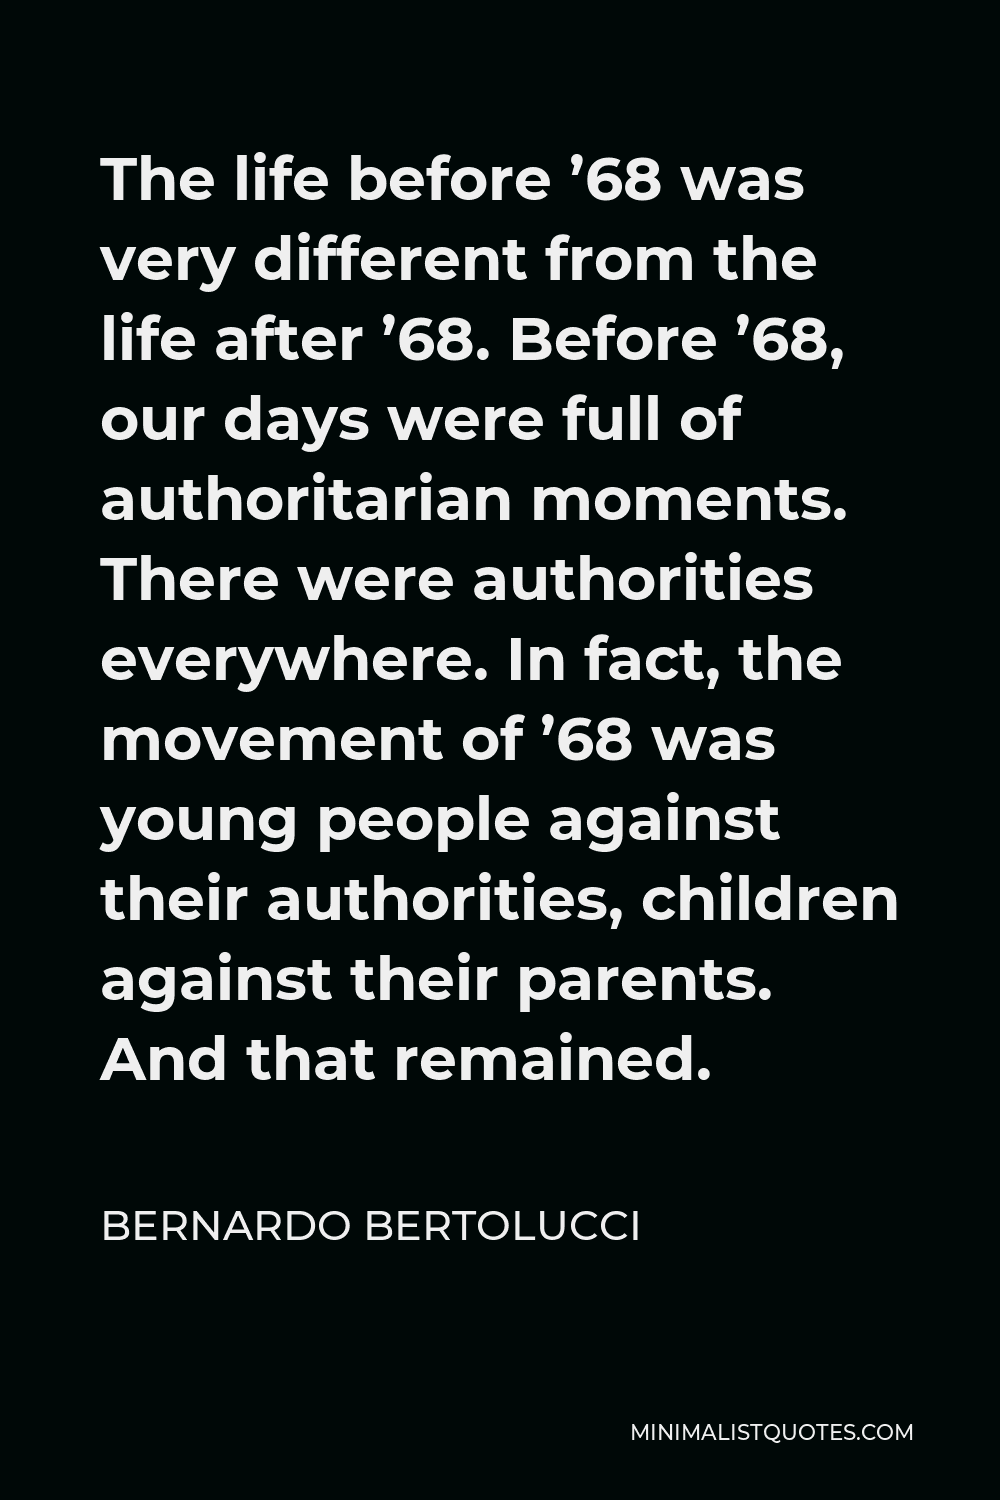 Bernardo Bertolucci Quote - The life before ’68 was very different from the life after ’68. Before ’68, our days were full of authoritarian moments. There were authorities everywhere. In fact, the movement of ’68 was young people against their authorities, children against their parents. And that remained.